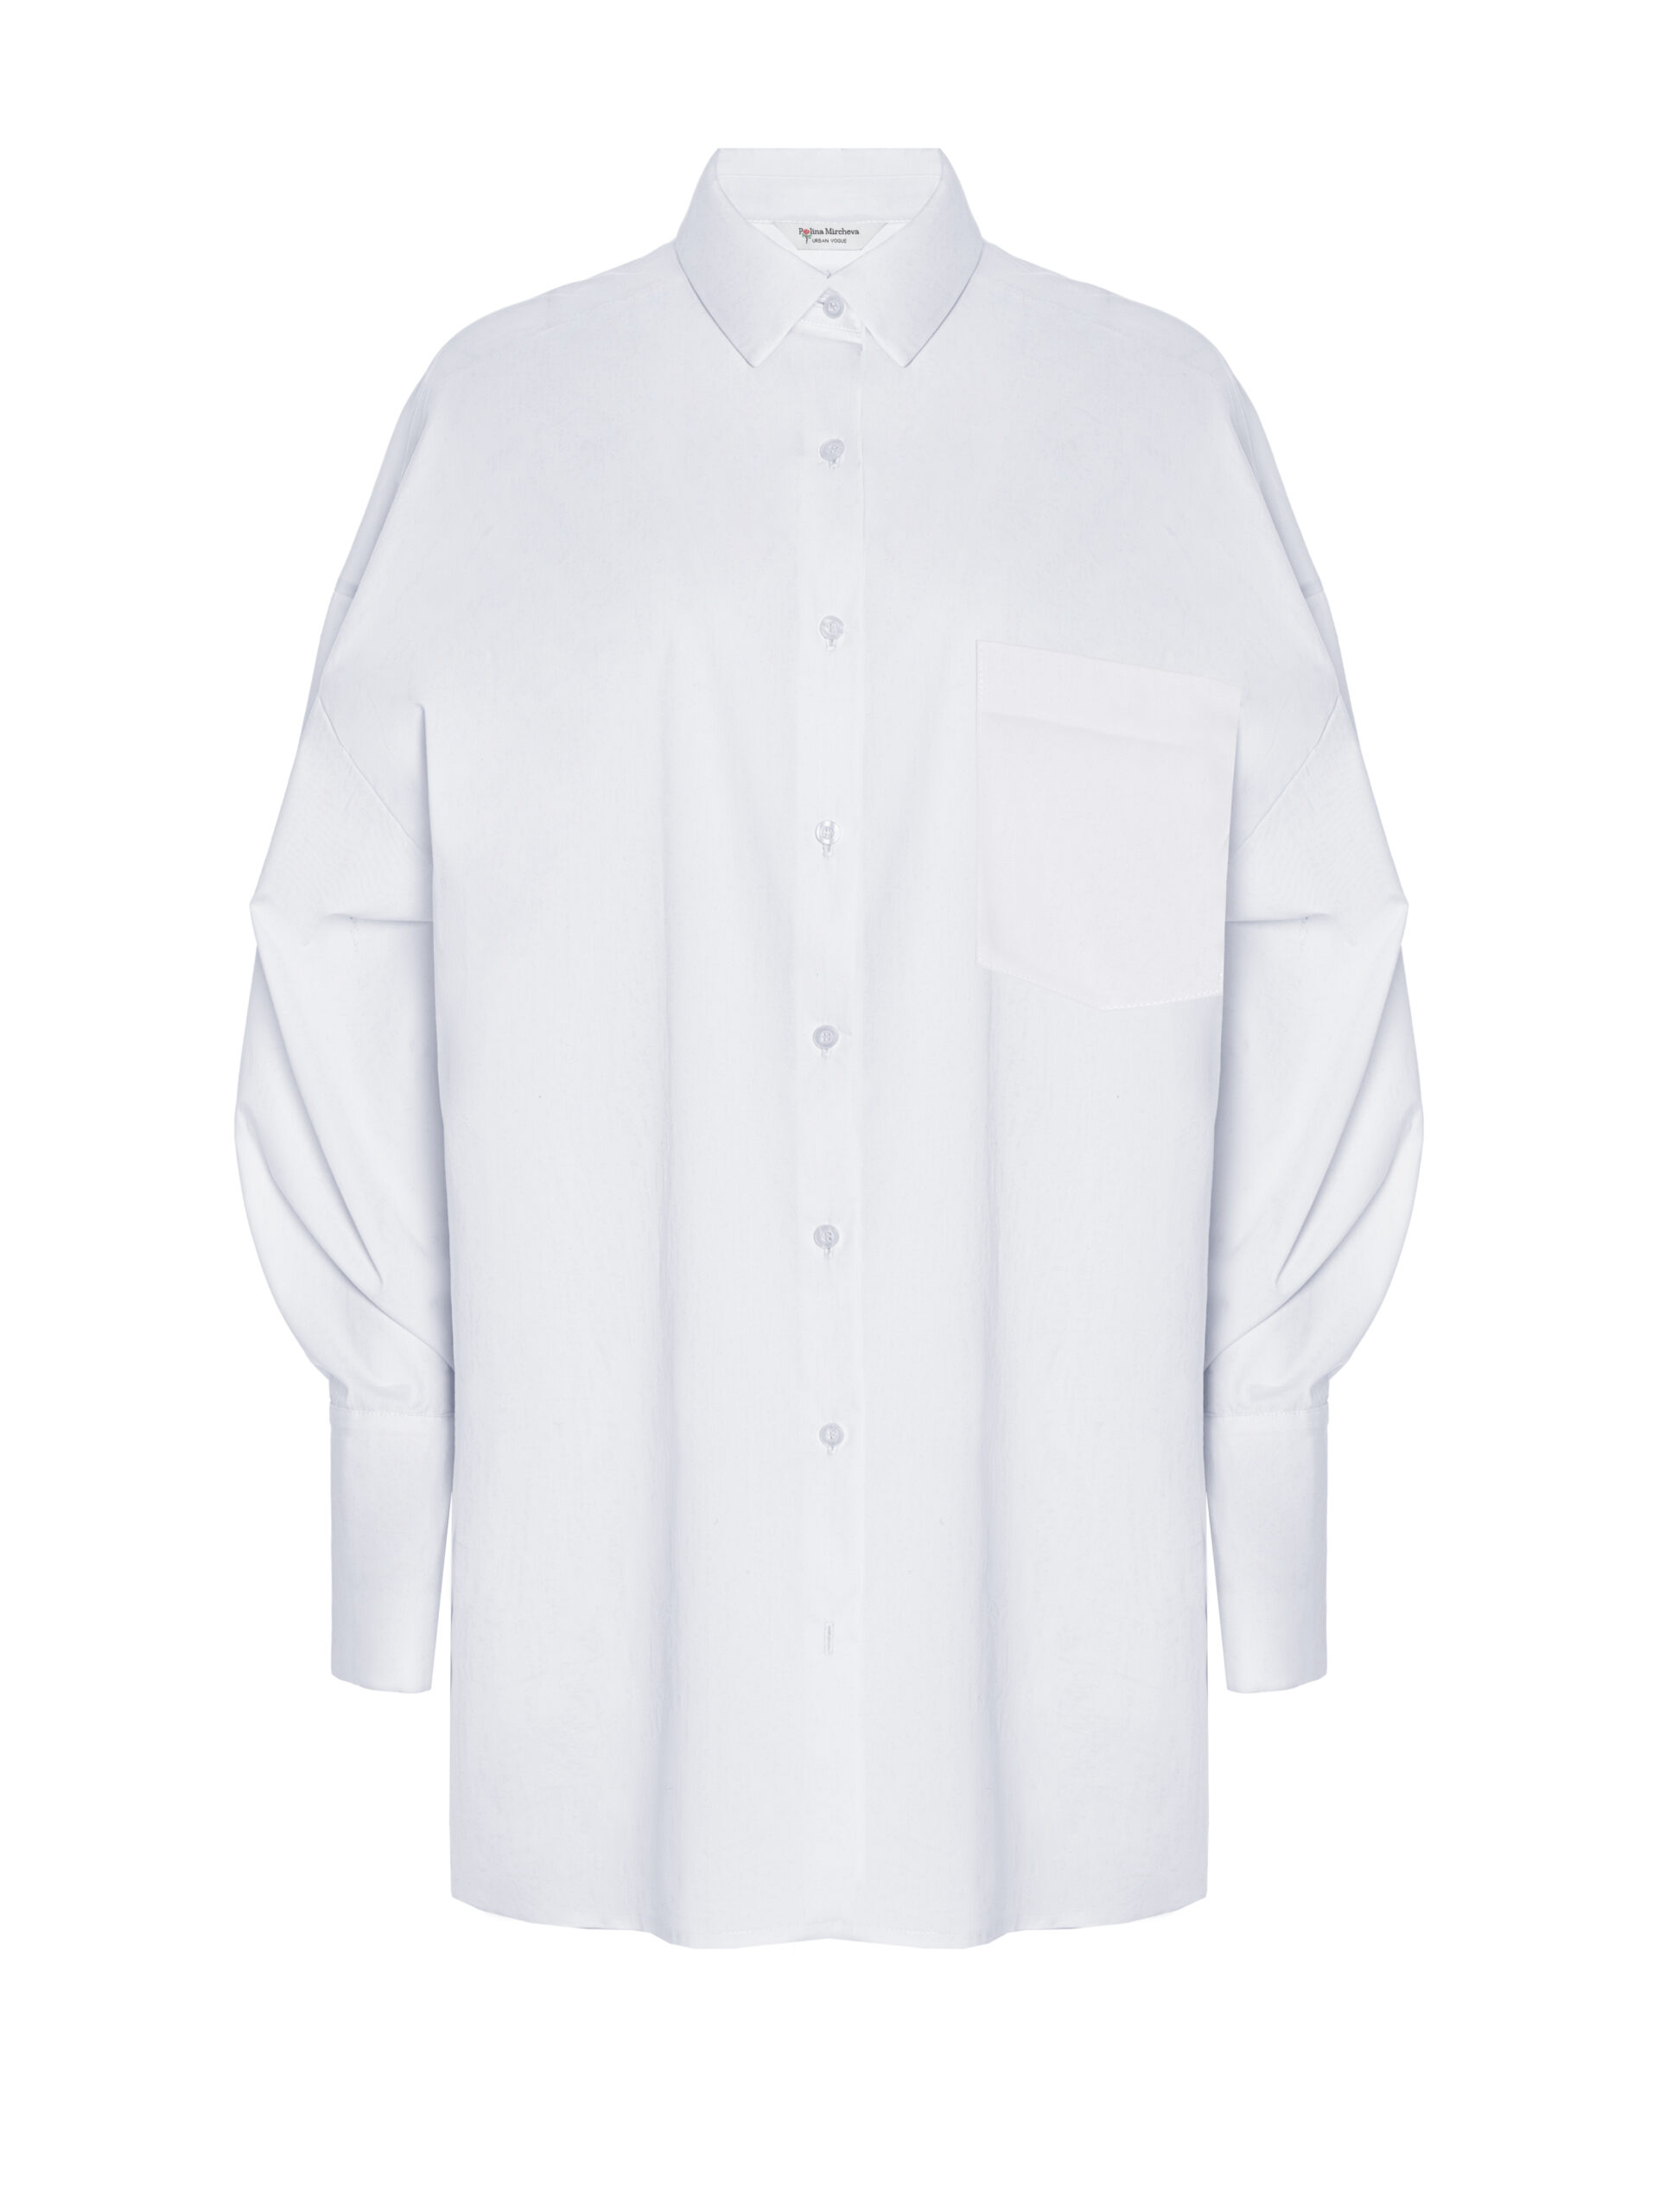 White shirt with frill – One size